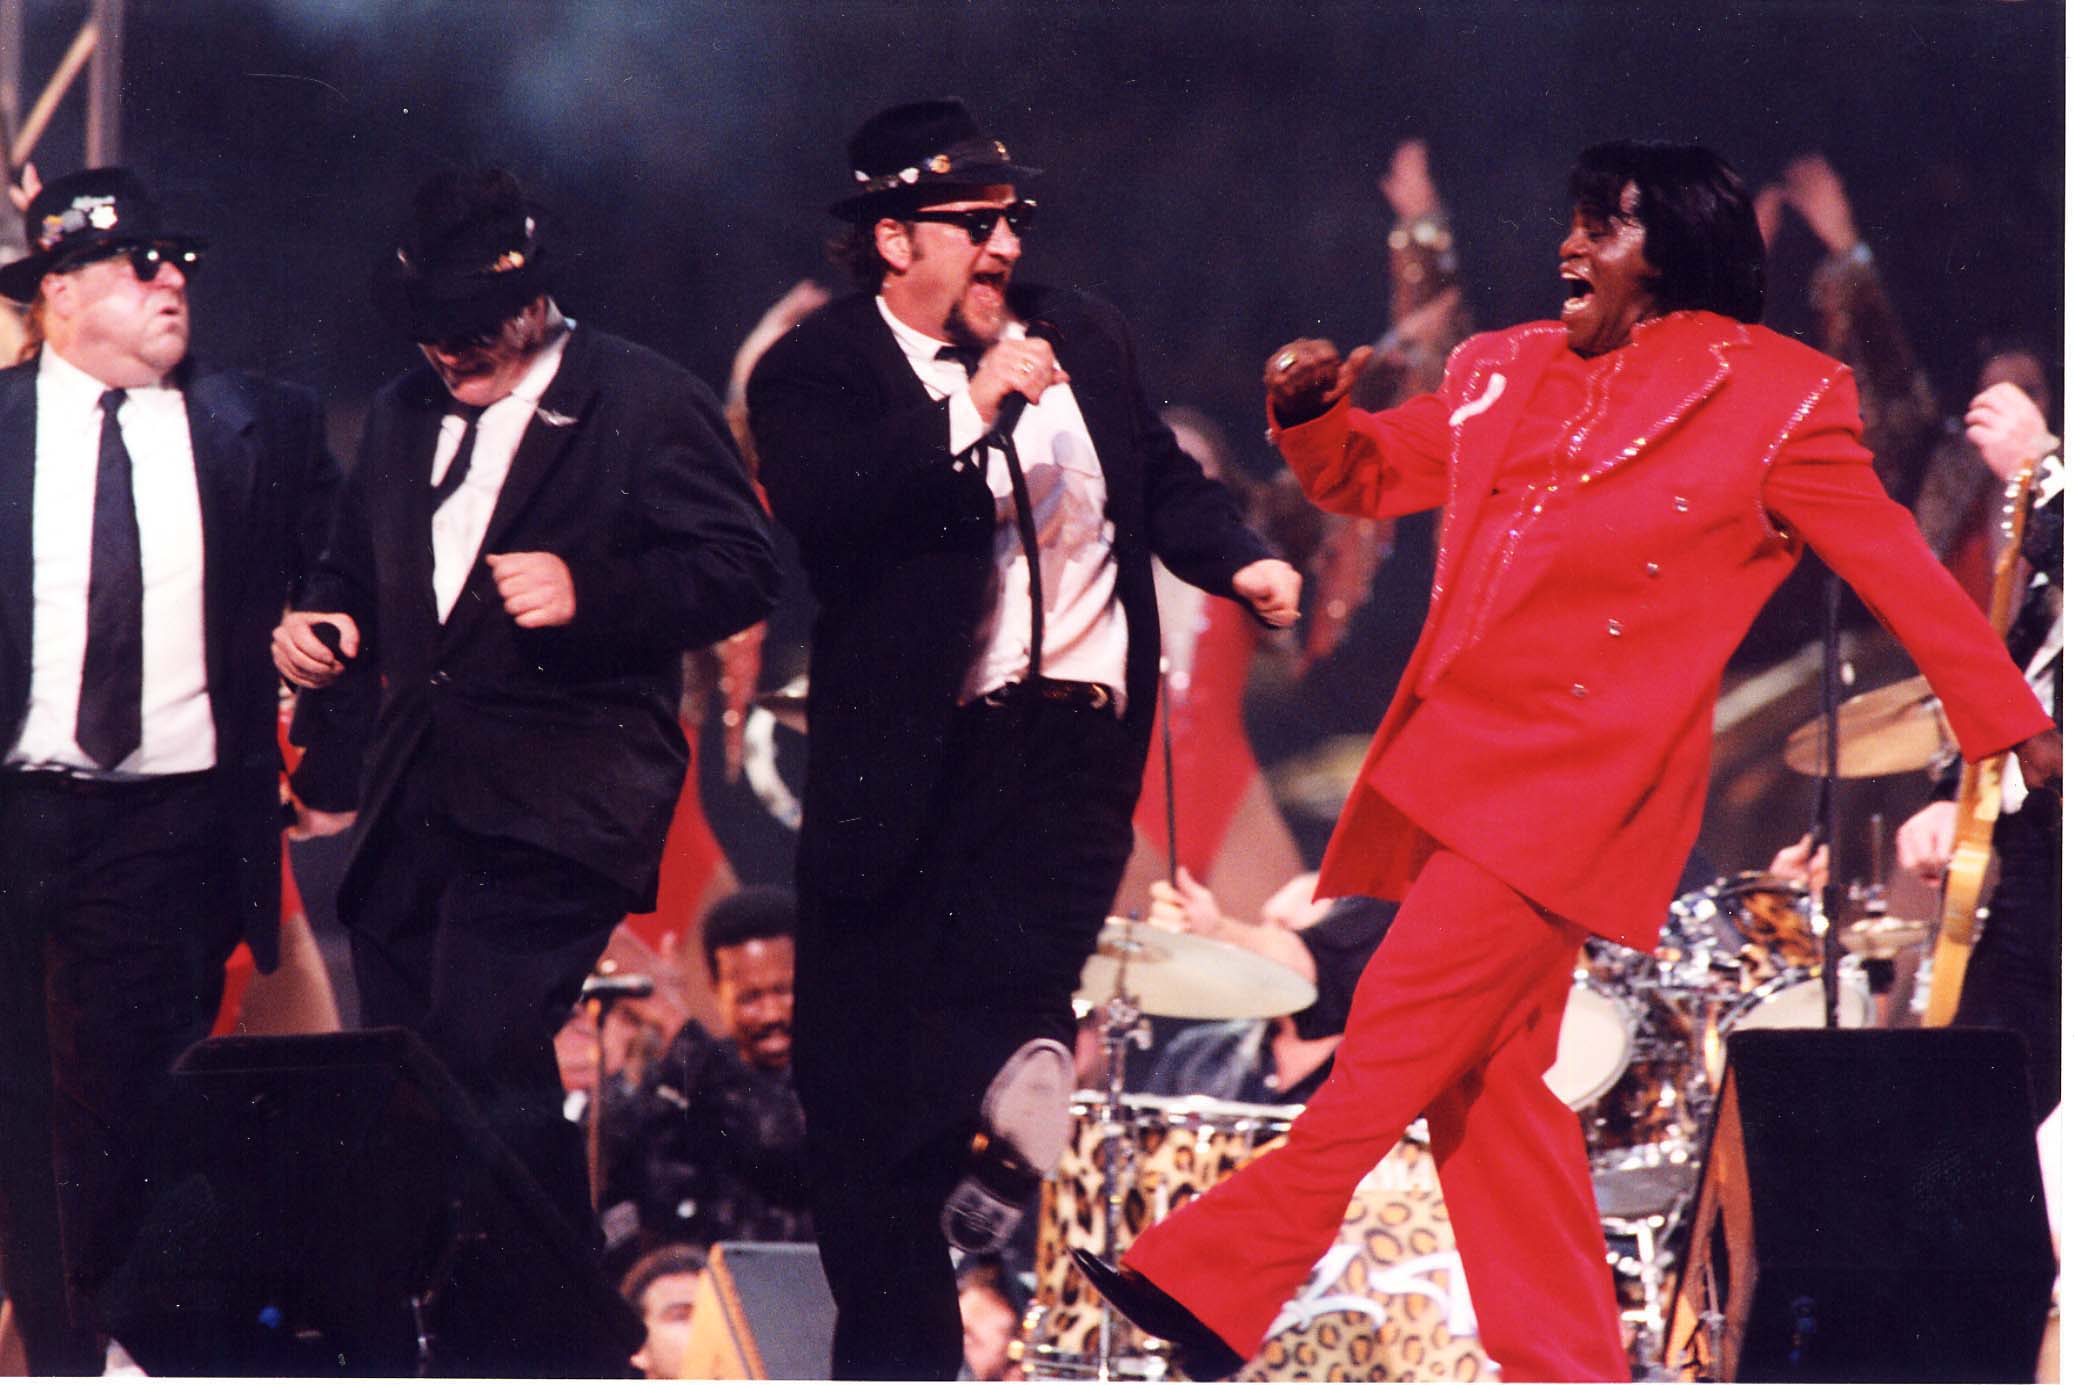 From left: John Goodman, Dan Aykroyd, and Jim Belushi of The Blues Brothers perform with James Brown during Super Bowl XXXI on Sept. 6, 1997 in New Orleans.